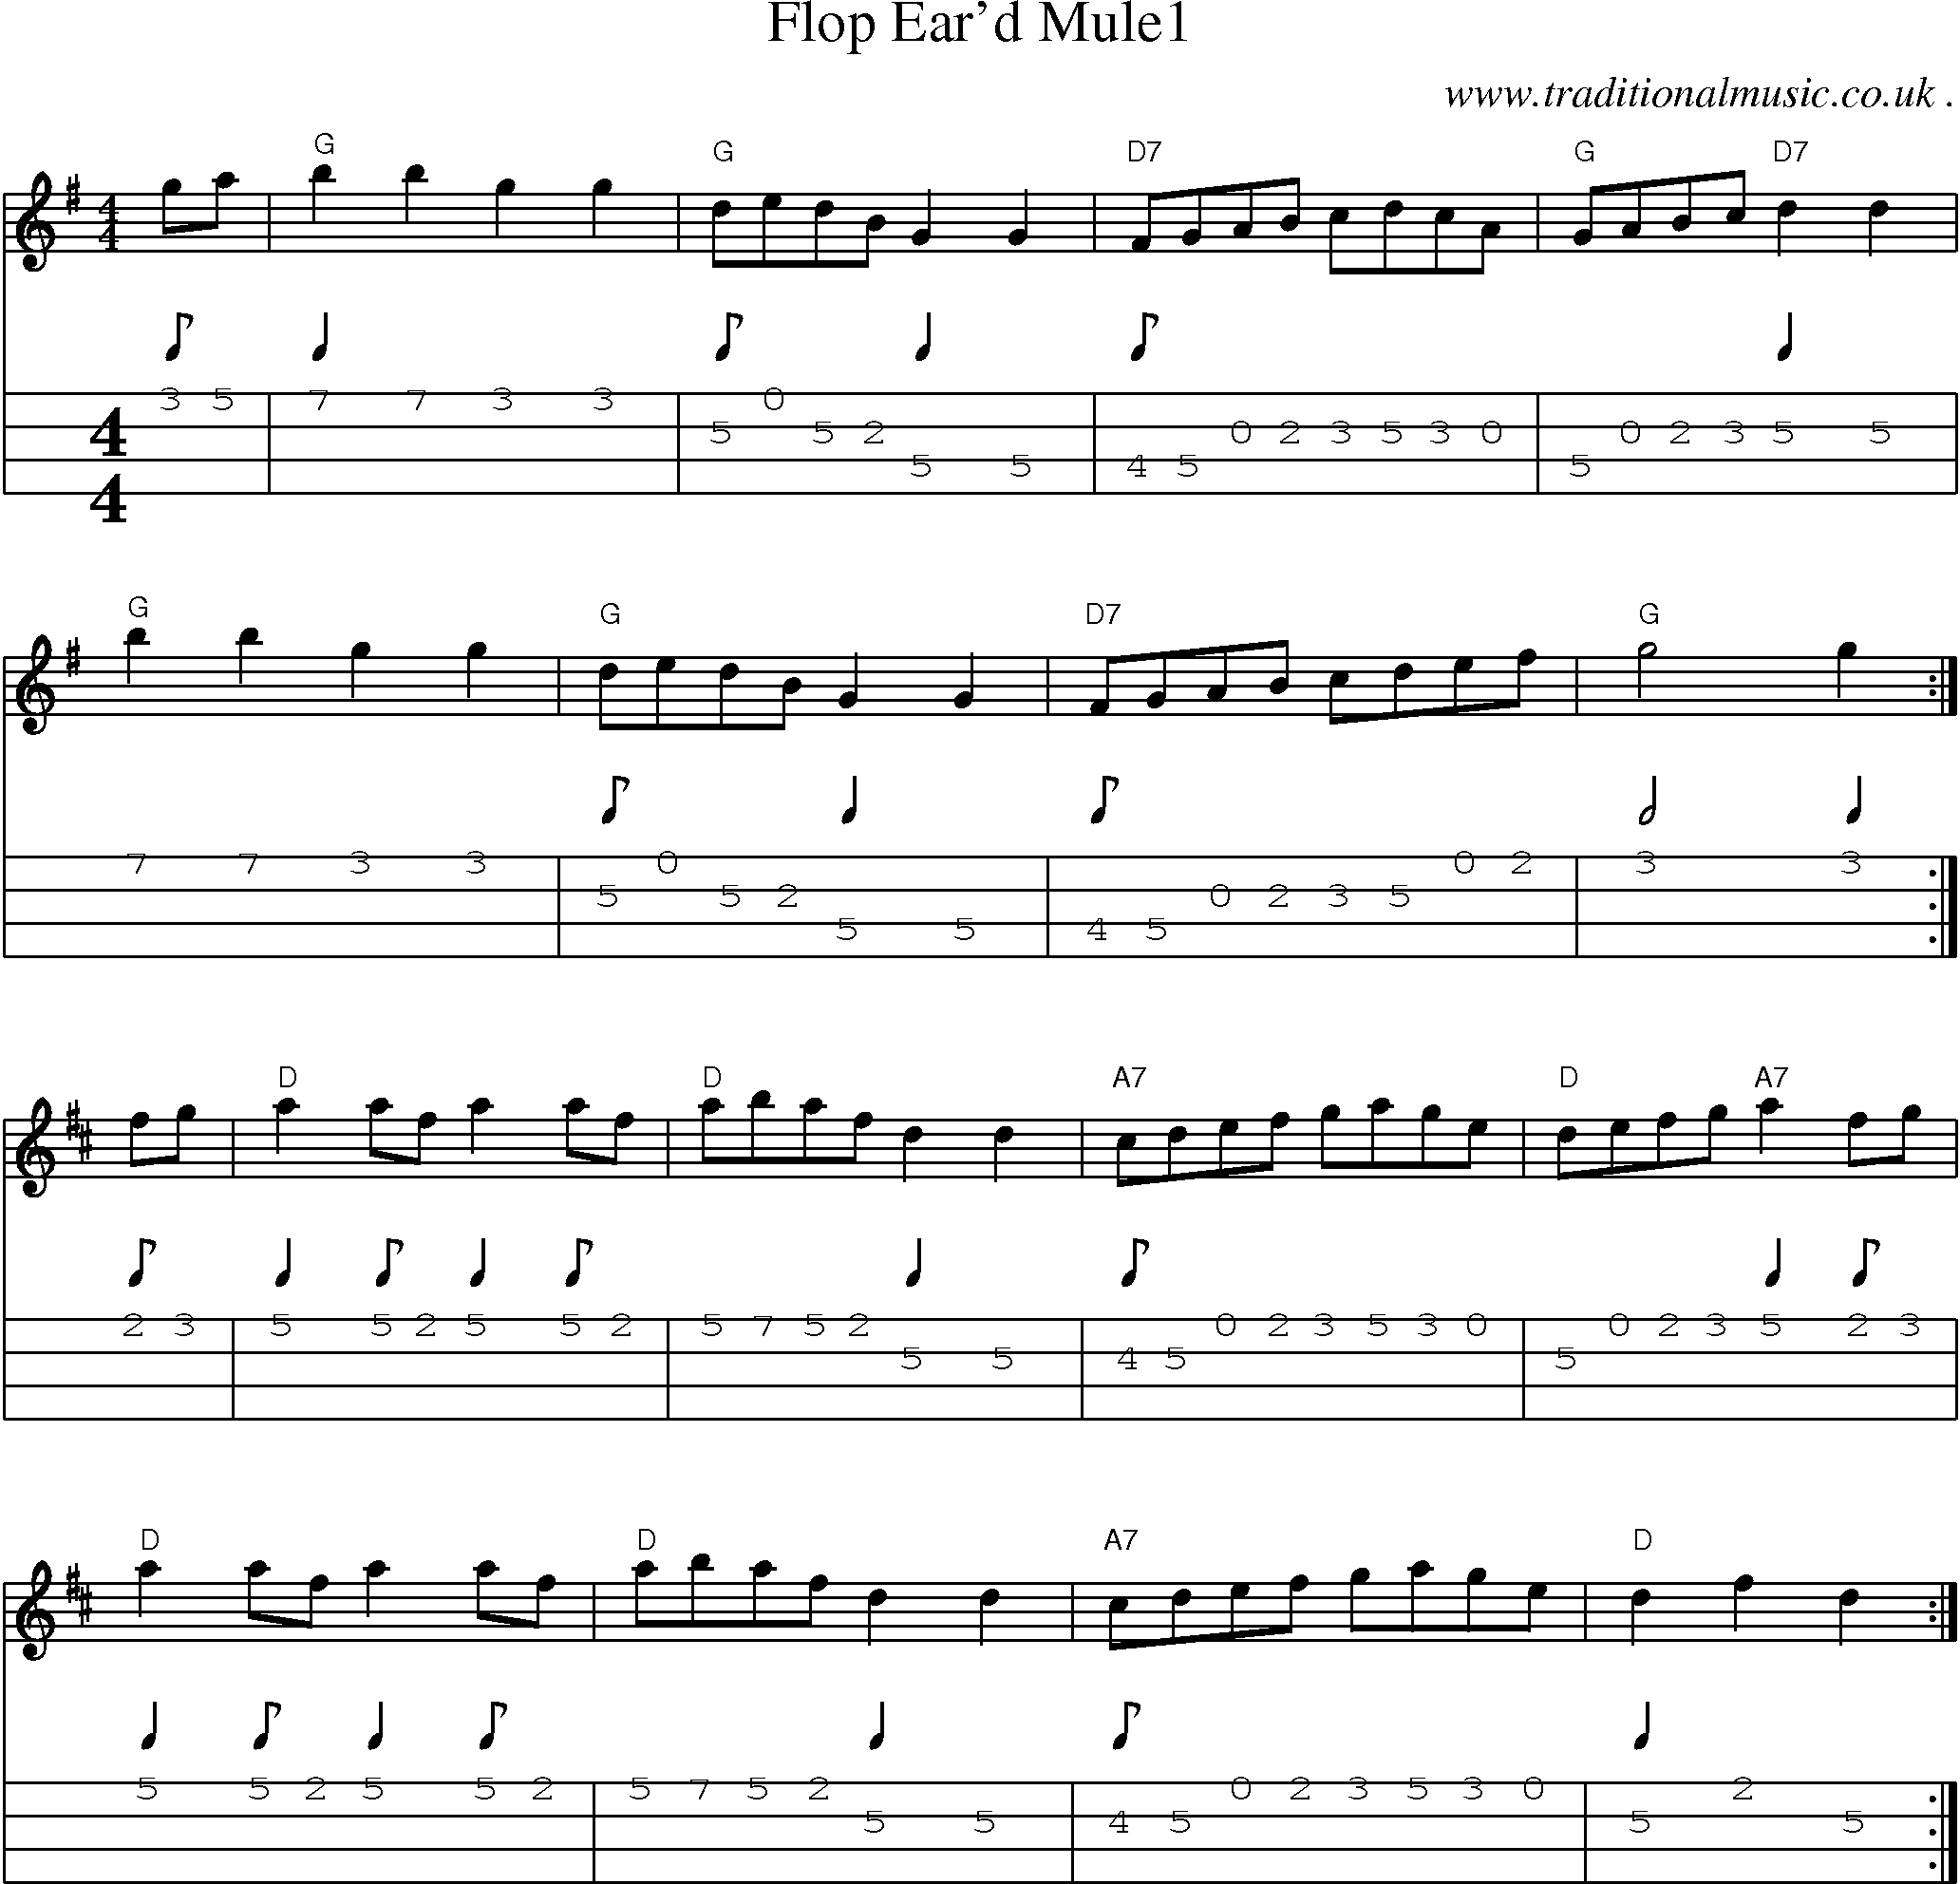 Music Score and Mandolin Tabs for Flop Eard Mule1